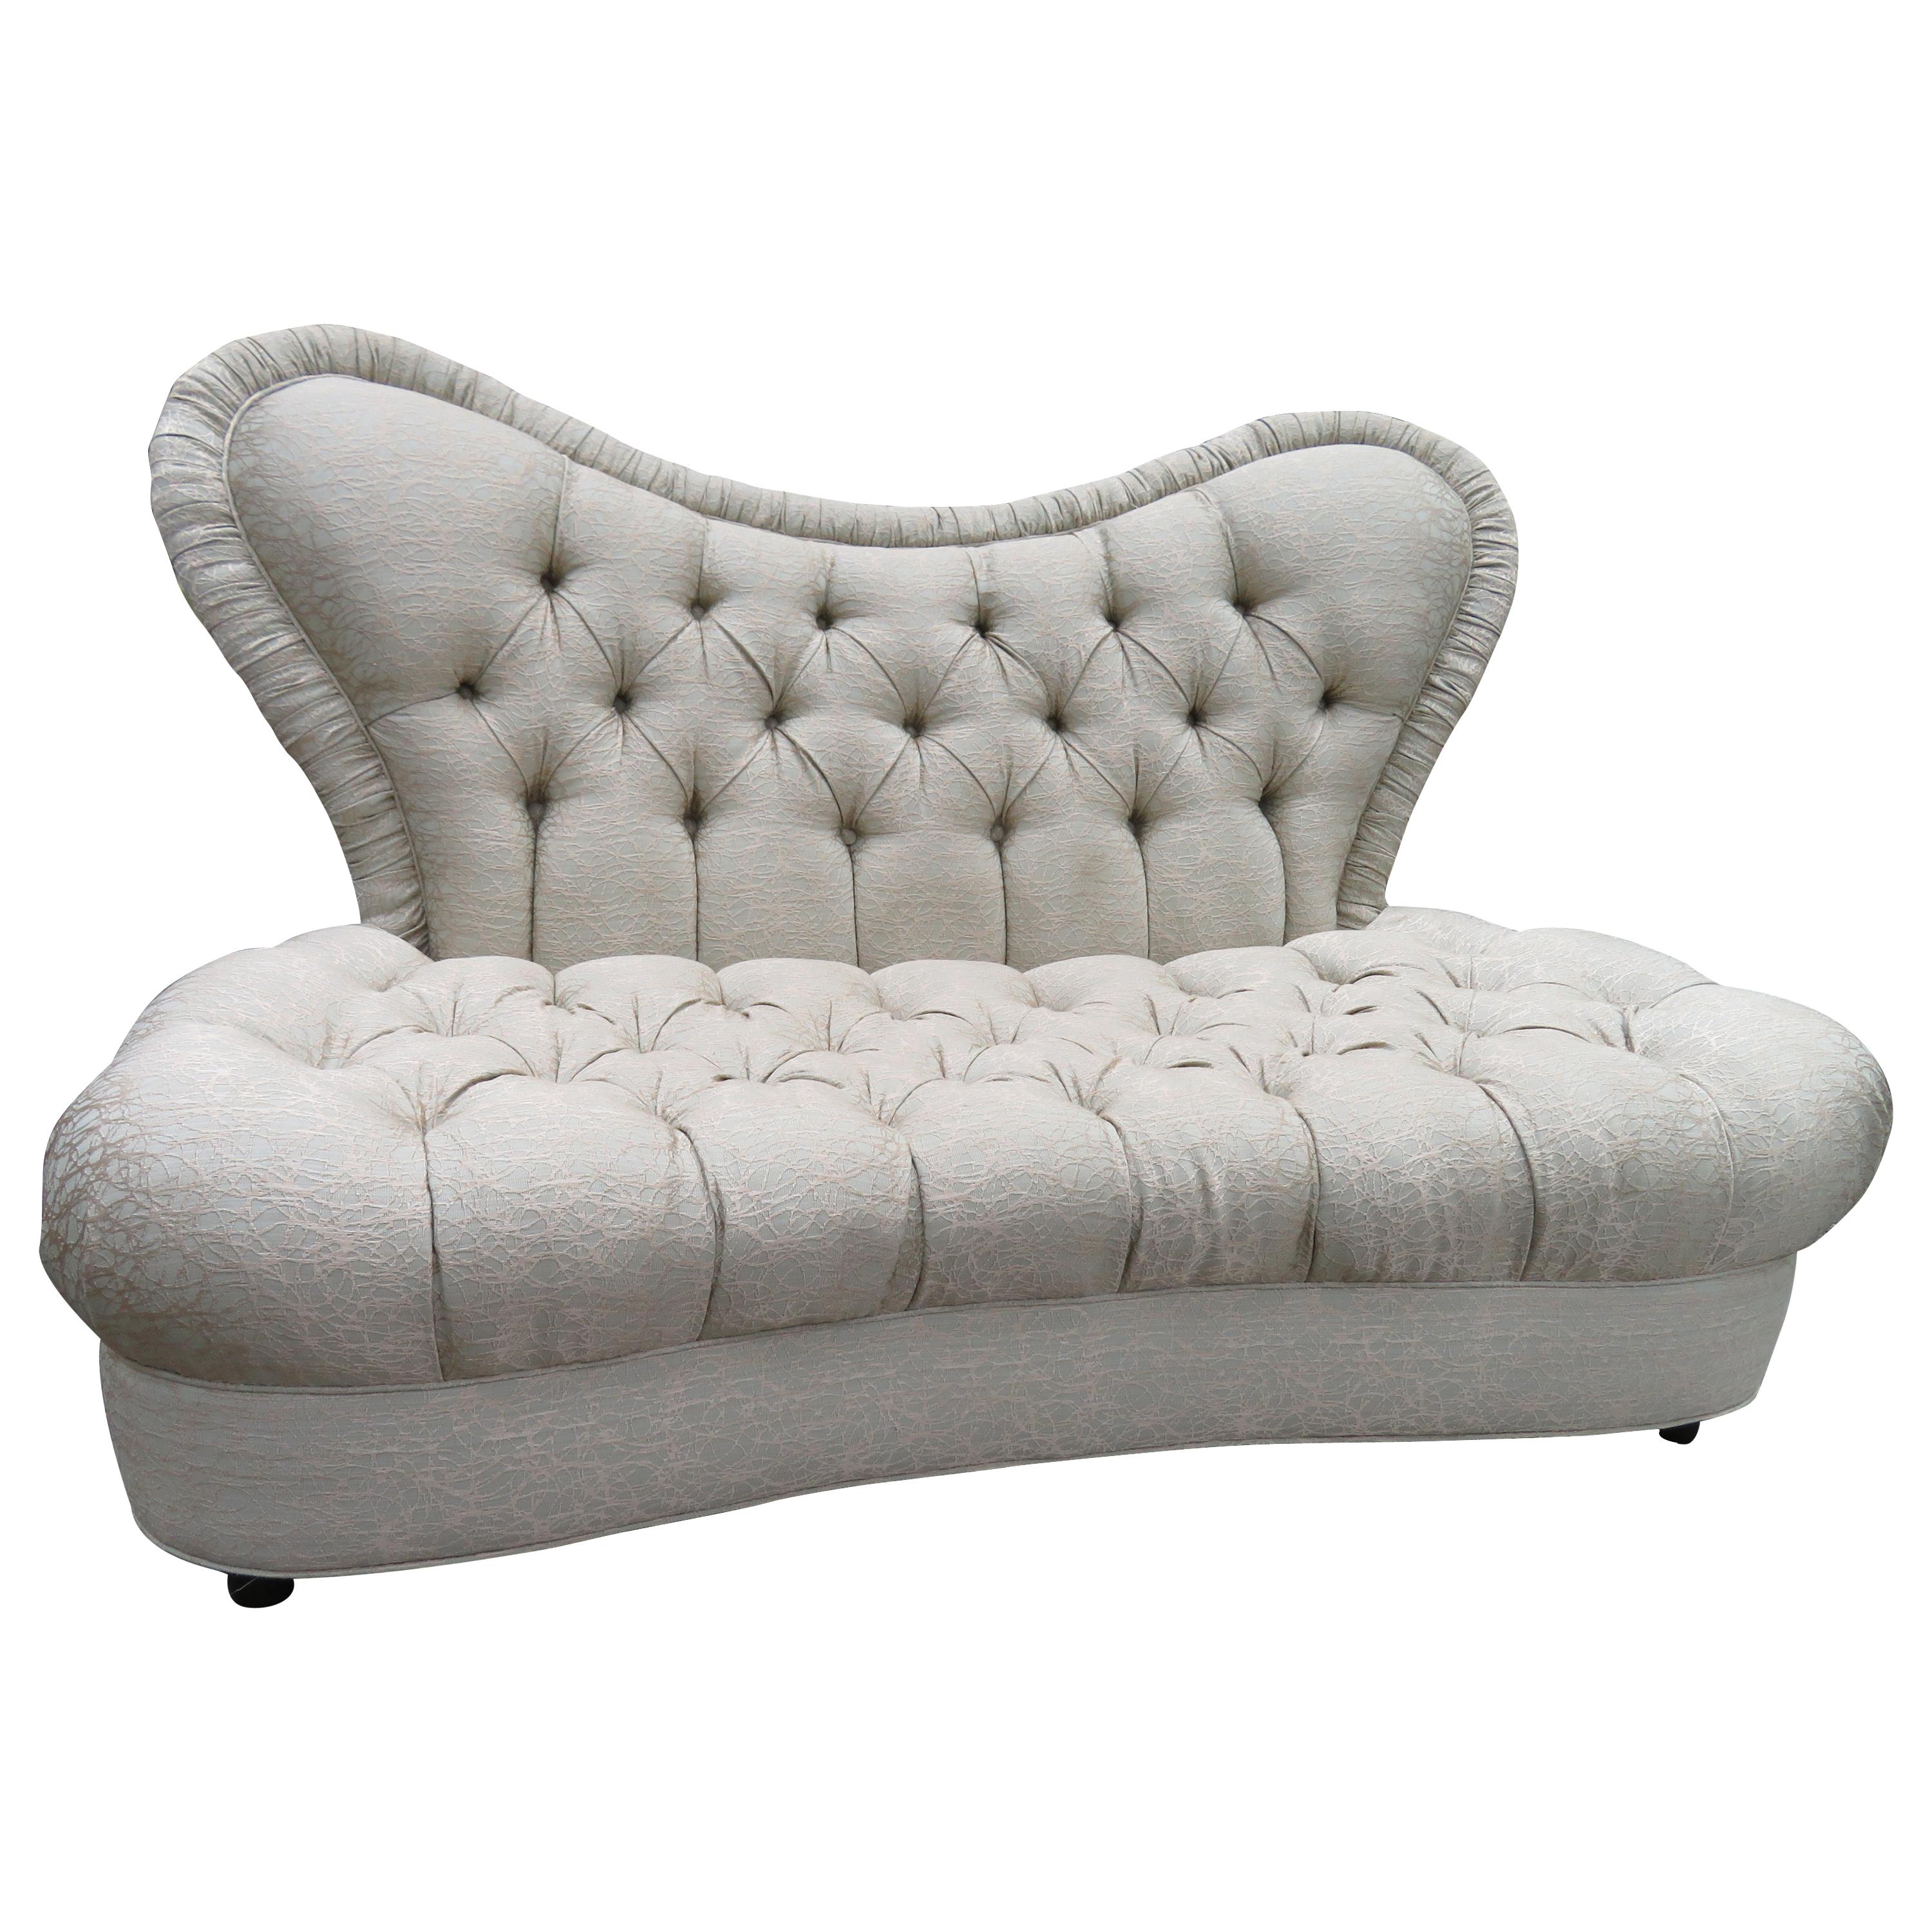 Amazing Fun Hollywood Regency Tall Tufted Back Loveseat For Sale